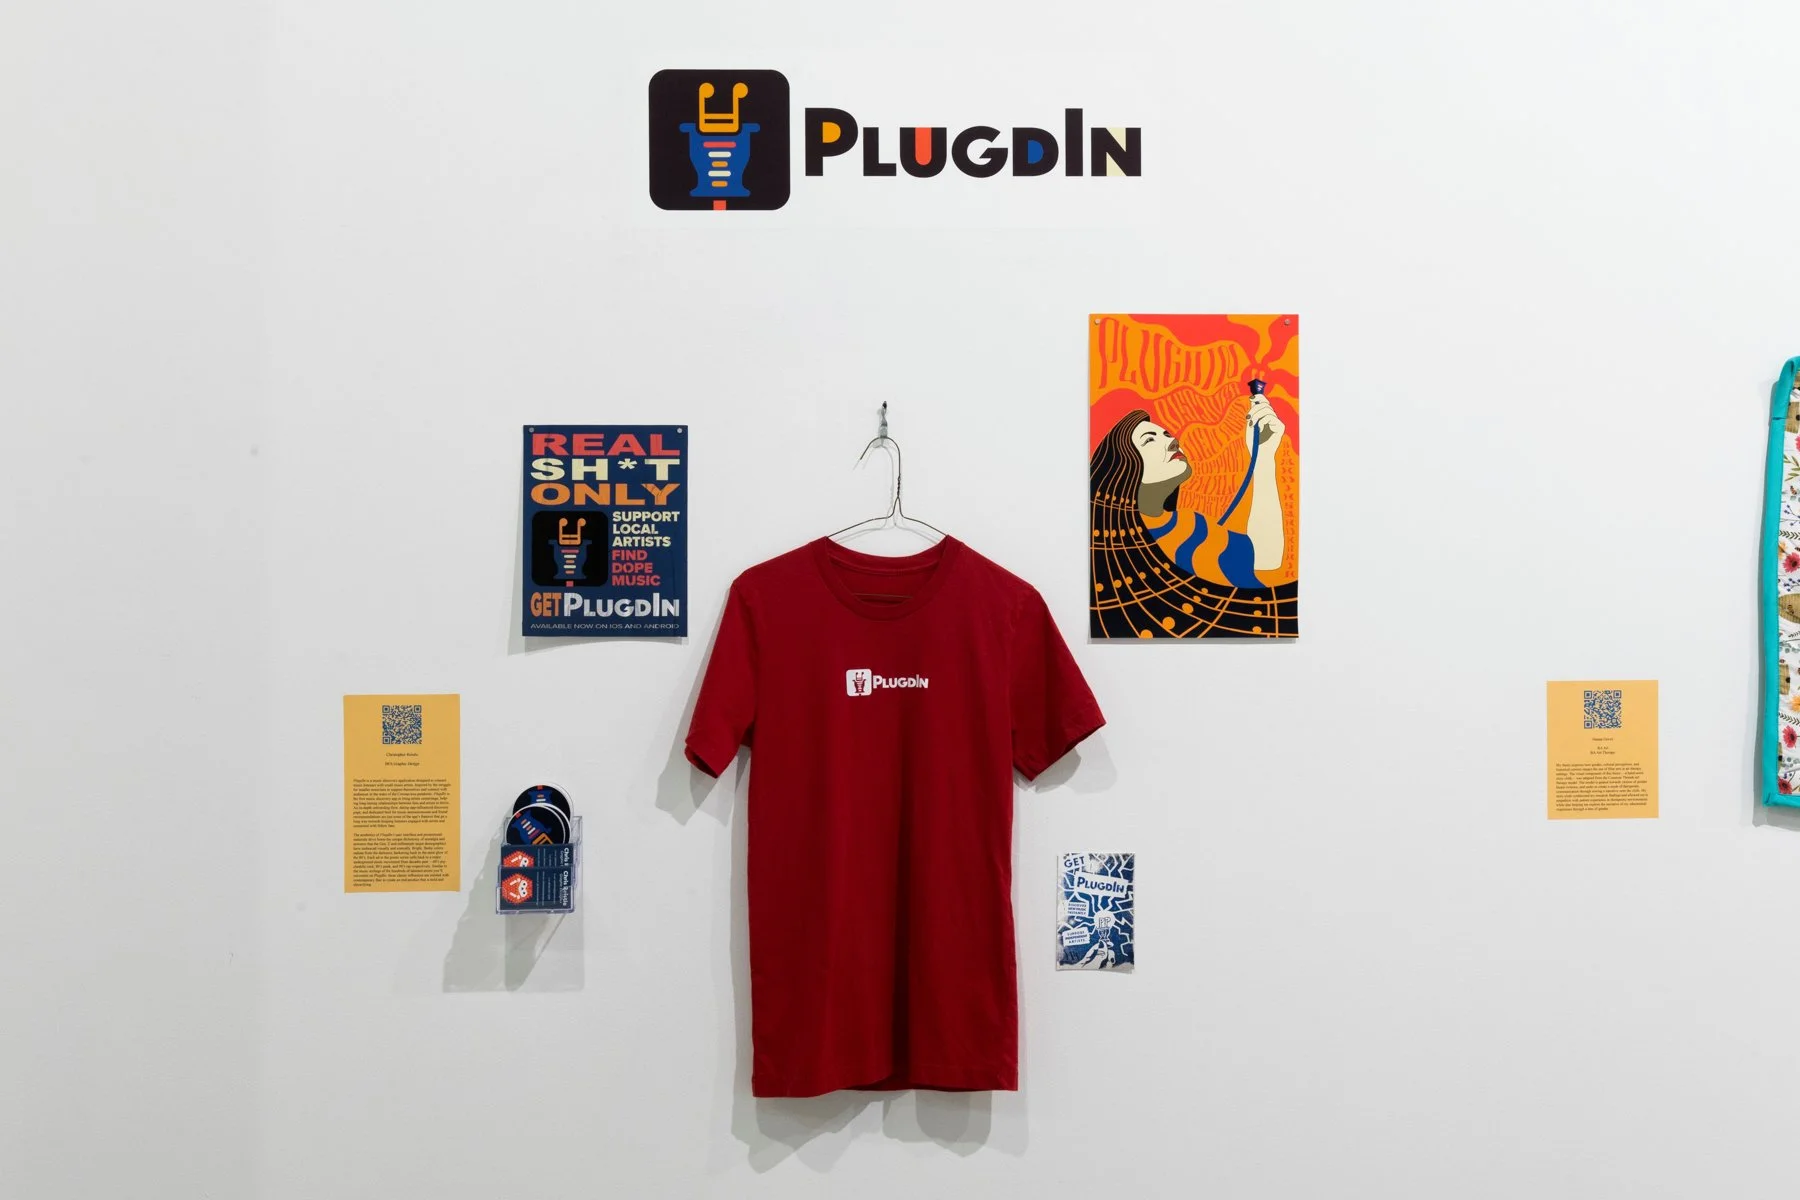 A white wall exhibiting the brand "PLUGIN" with related merchandise and posters